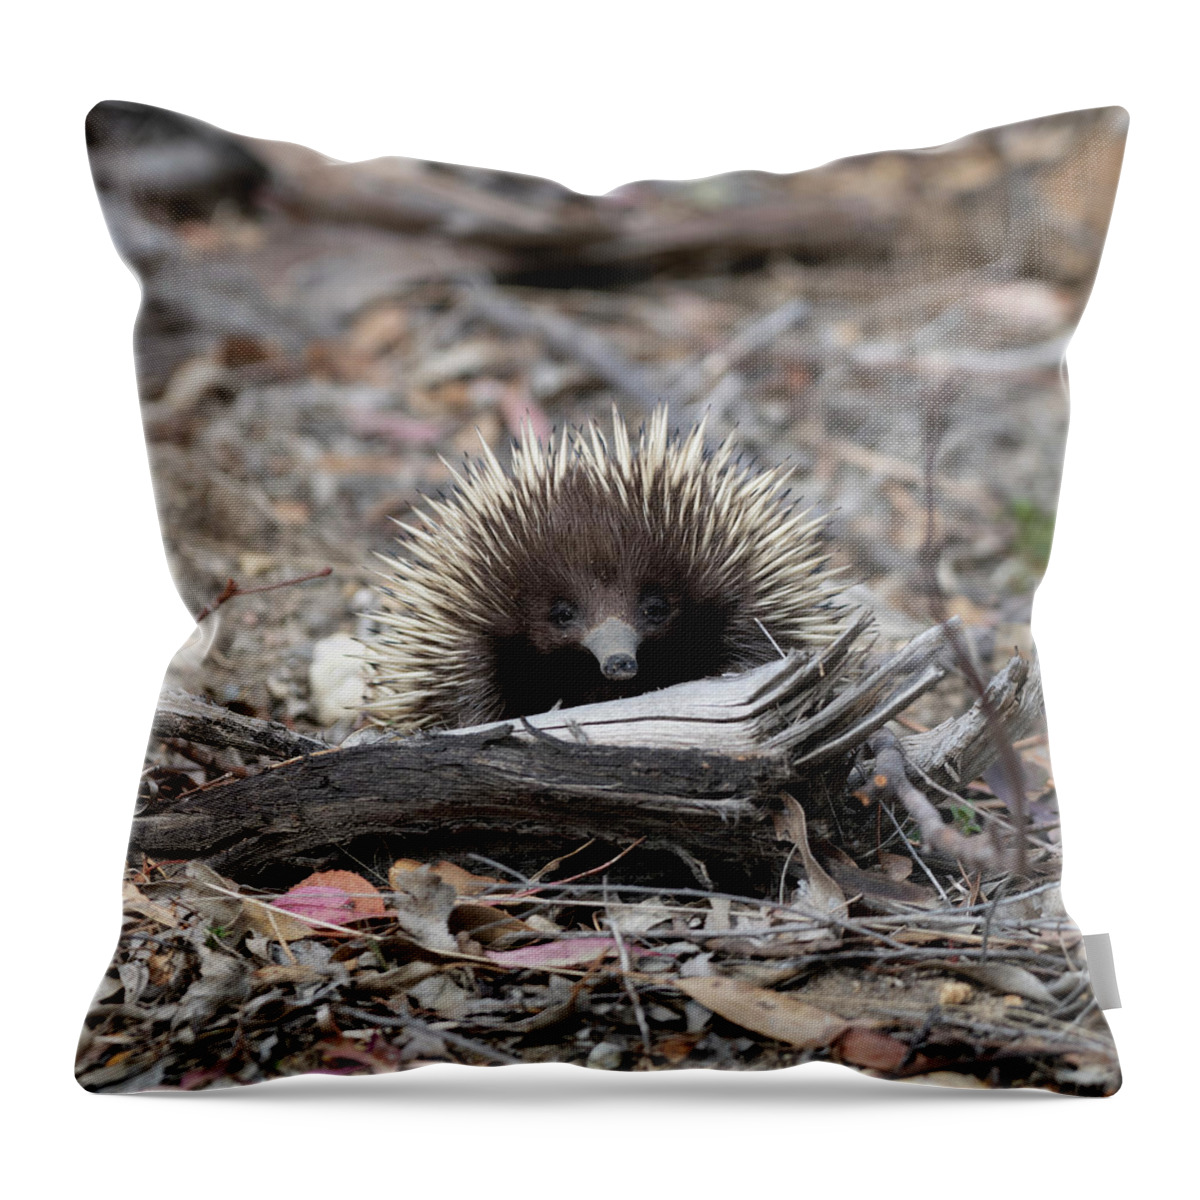 Echidna Throw Pillow featuring the photograph Echidna by Patrick Nowotny